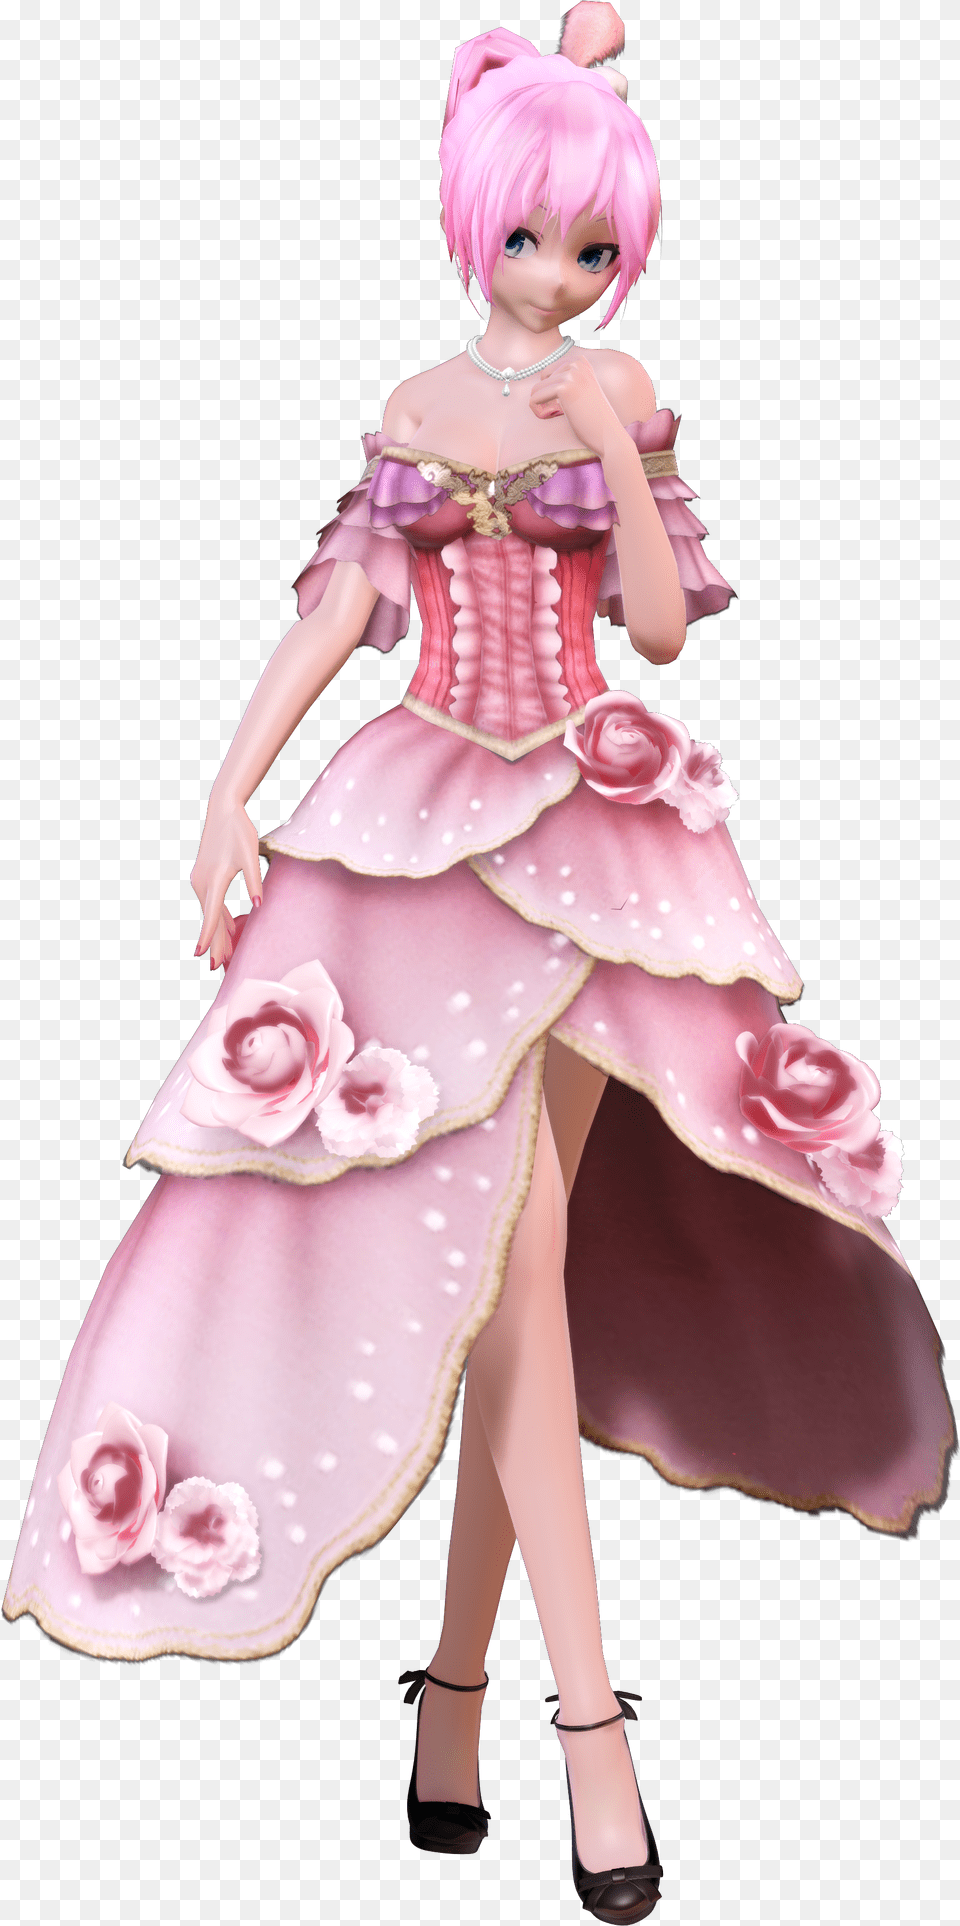 Mmd Luka Dress, Figurine, Toy, Doll, Girl Free Transparent Png